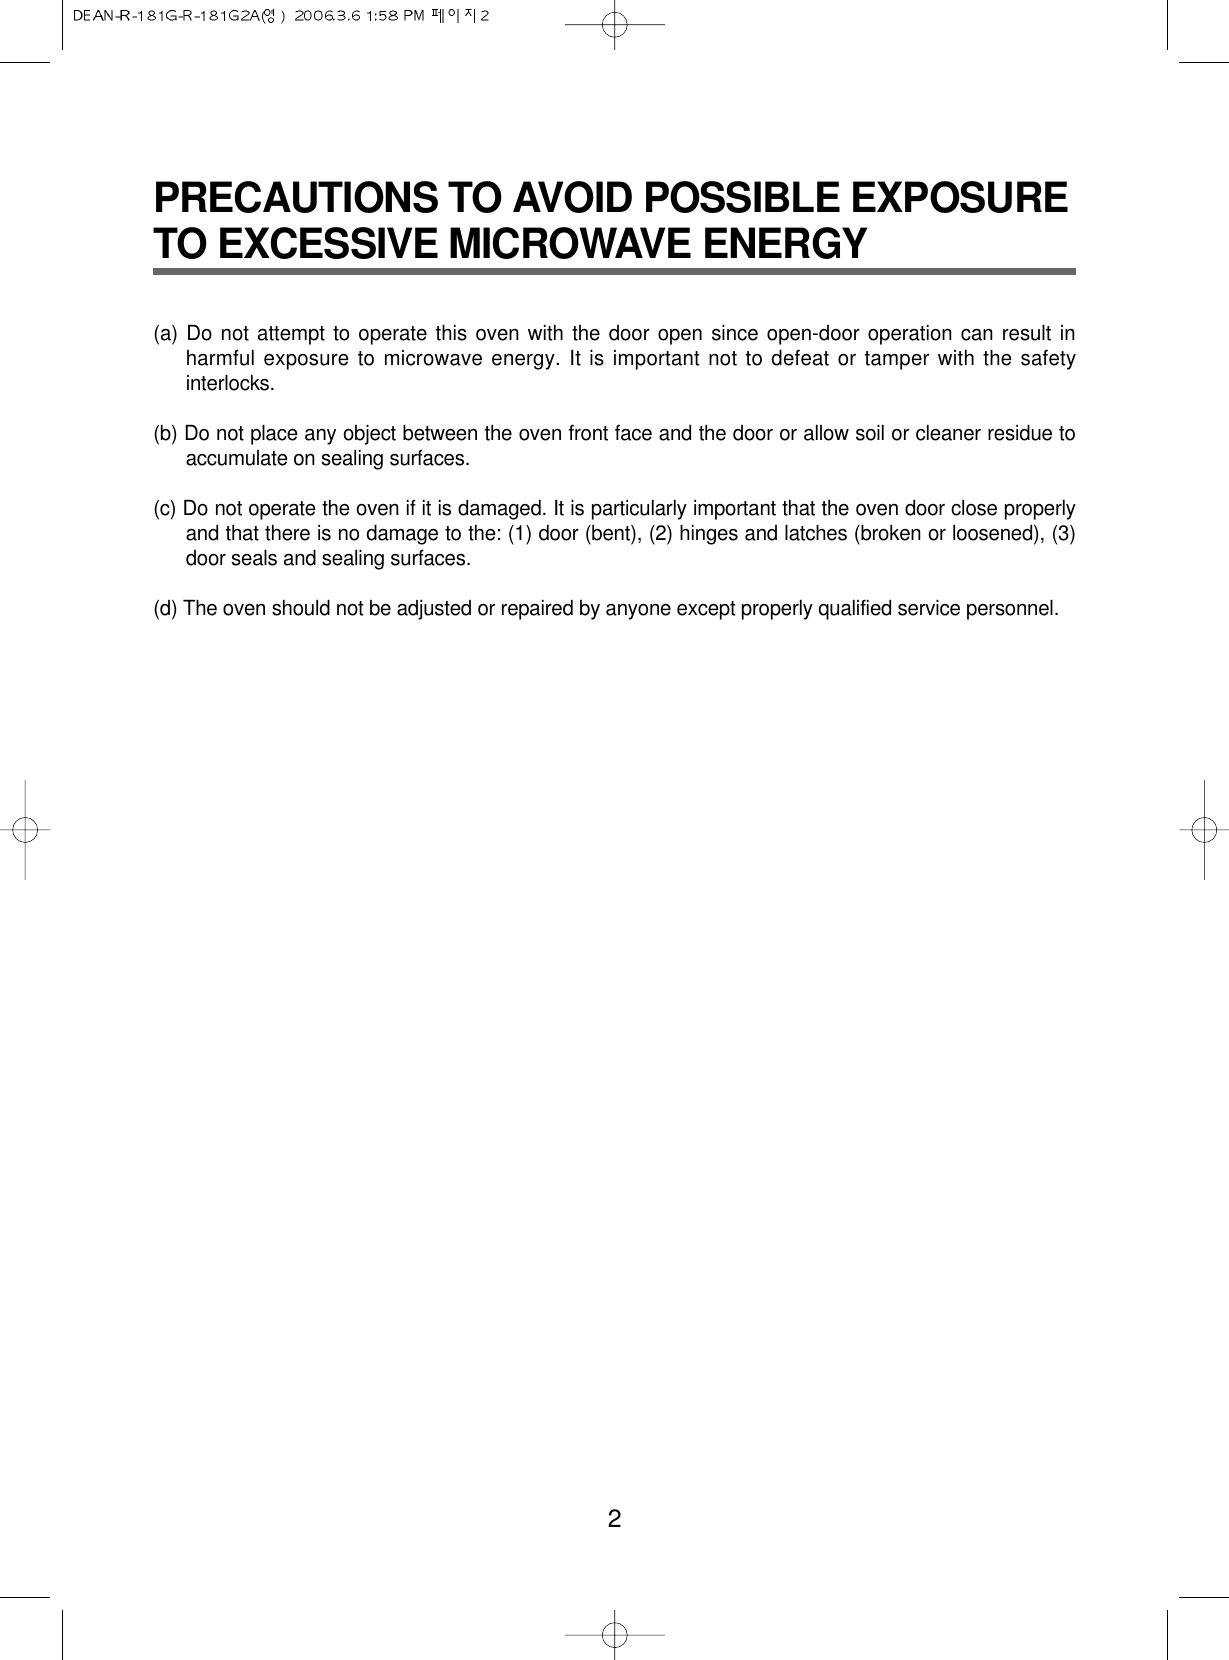 PRECAUTIONS TO AVOID POSSIBLE EXPOSURETO EXCESSIVE MICROWAVE ENERGY(a) Do not attempt to operate this oven with the door open since open-door operation can result inharmful exposure to microwave energy. It is important not to defeat or tamper with the safetyinterlocks.(b) Do not place any object between the oven front face and the door or allow soil or cleaner residue toaccumulate on sealing surfaces.(c) Do not operate the oven if it is damaged. It is particularly important that the oven door close properlyand that there is no damage to the: (1) door (bent), (2) hinges and latches (broken or loosened), (3)door seals and sealing surfaces.(d) The oven should not be adjusted or repaired by anyone except properly qualified service personnel.2